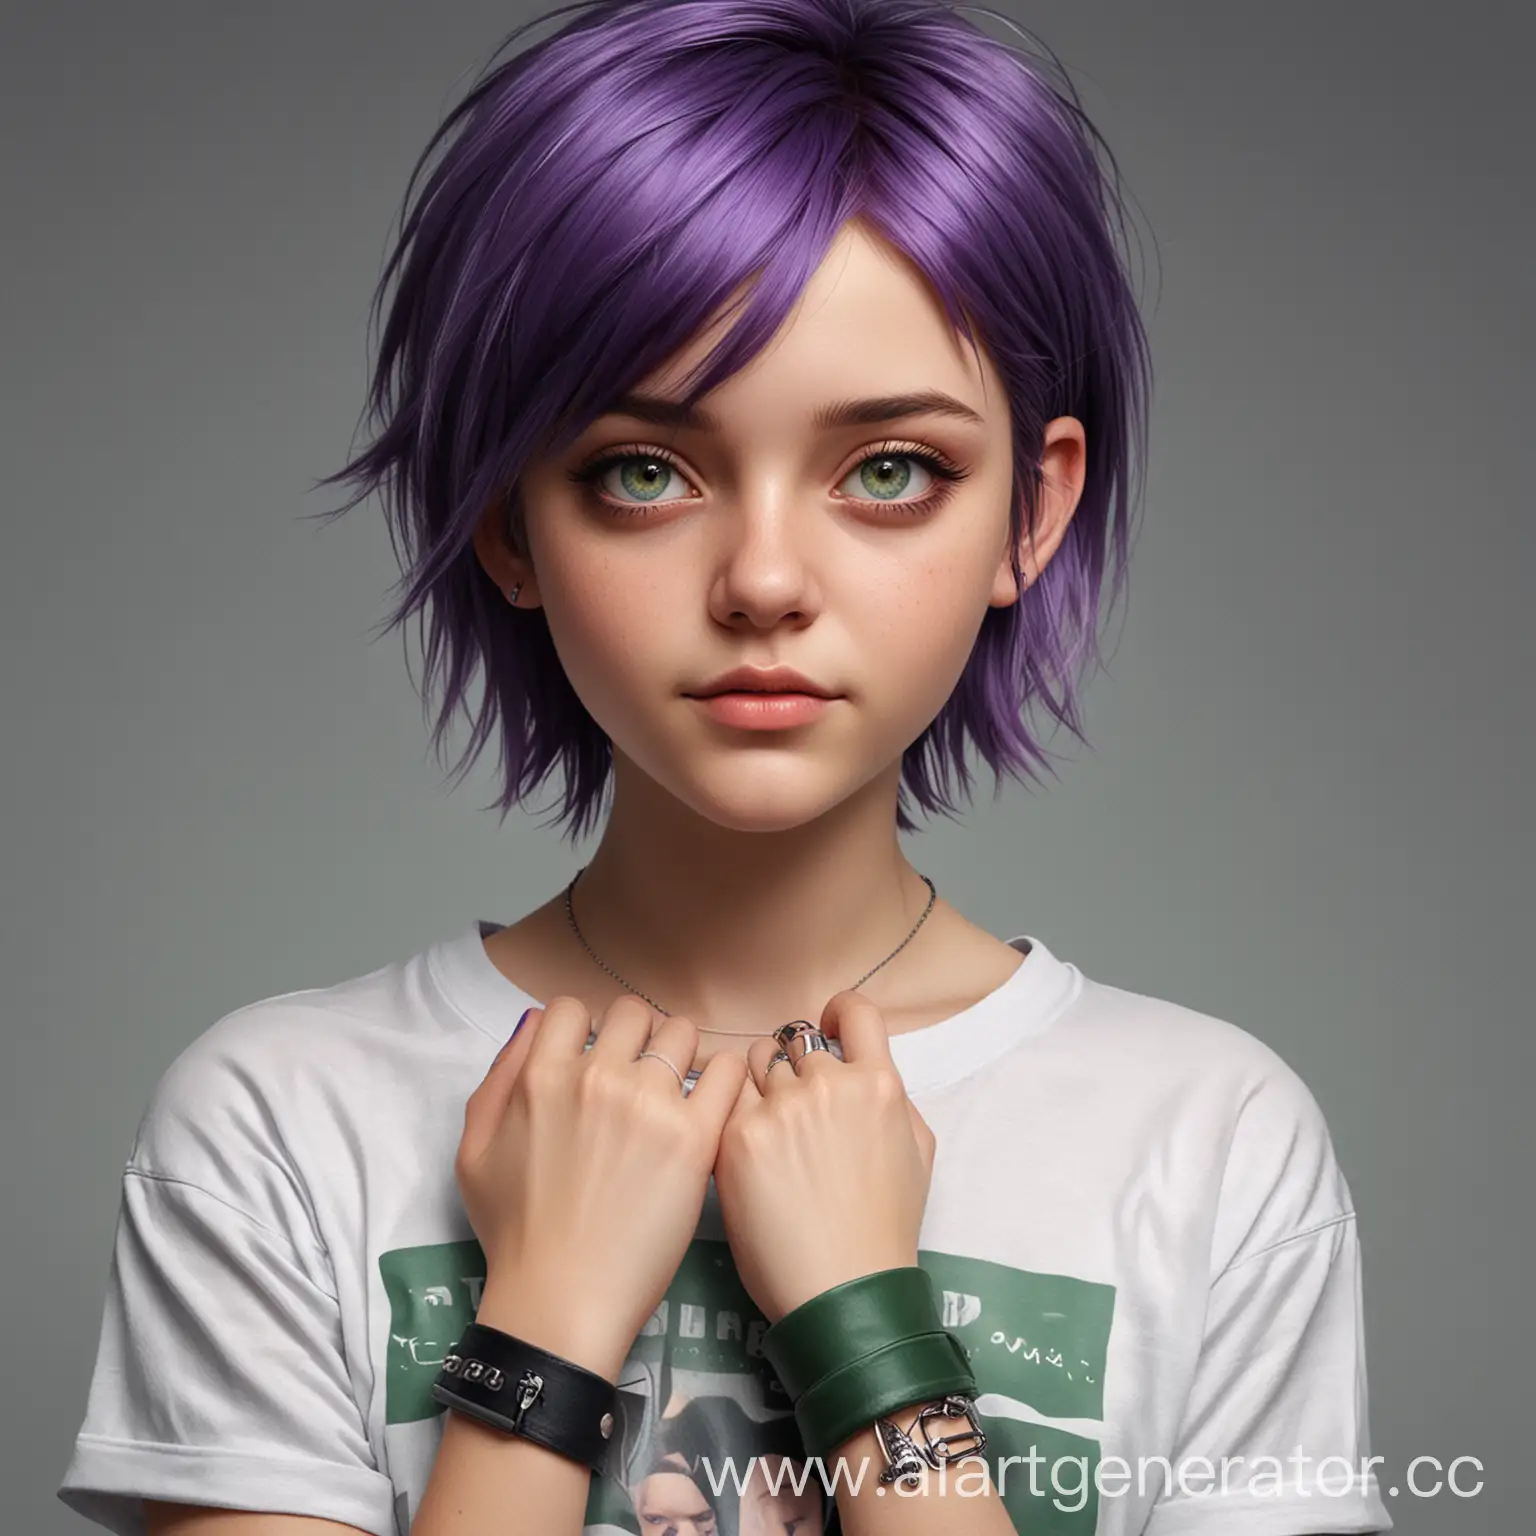 Photorealistic-Teenage-Girl-with-Short-Green-Hair-and-Purple-Eyes-in-TShirt-and-Wrist-Wraps